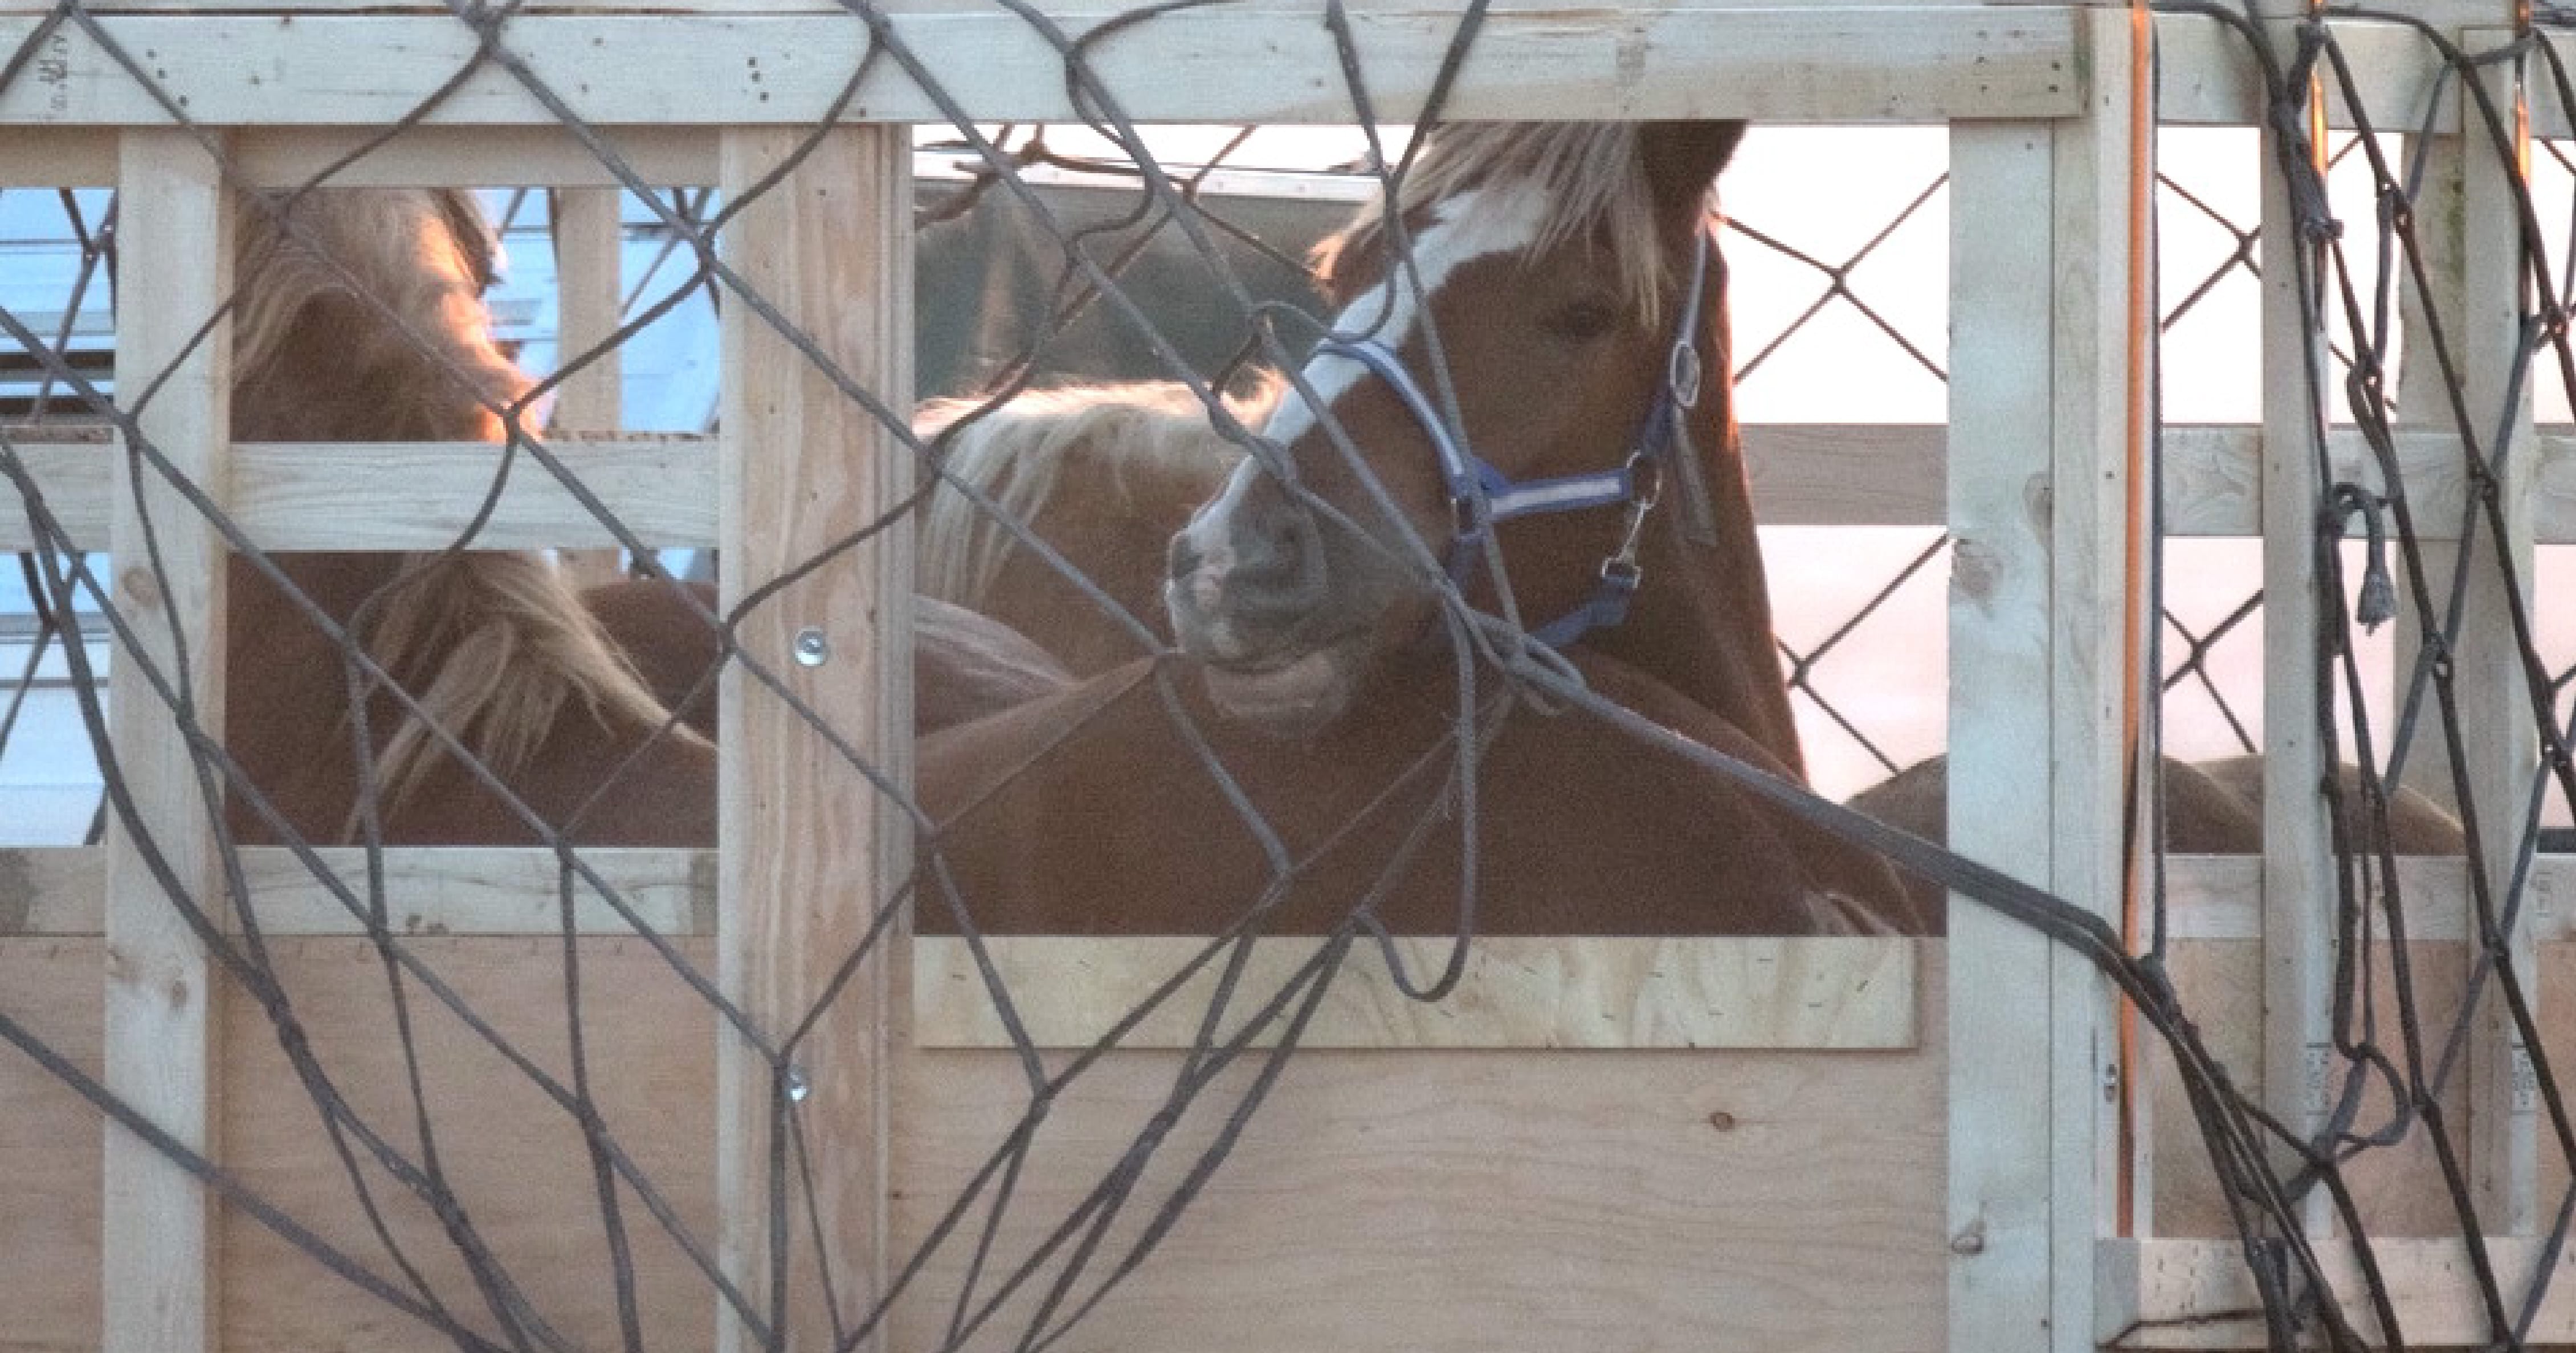 Image shows horse in crate ready for export at airport